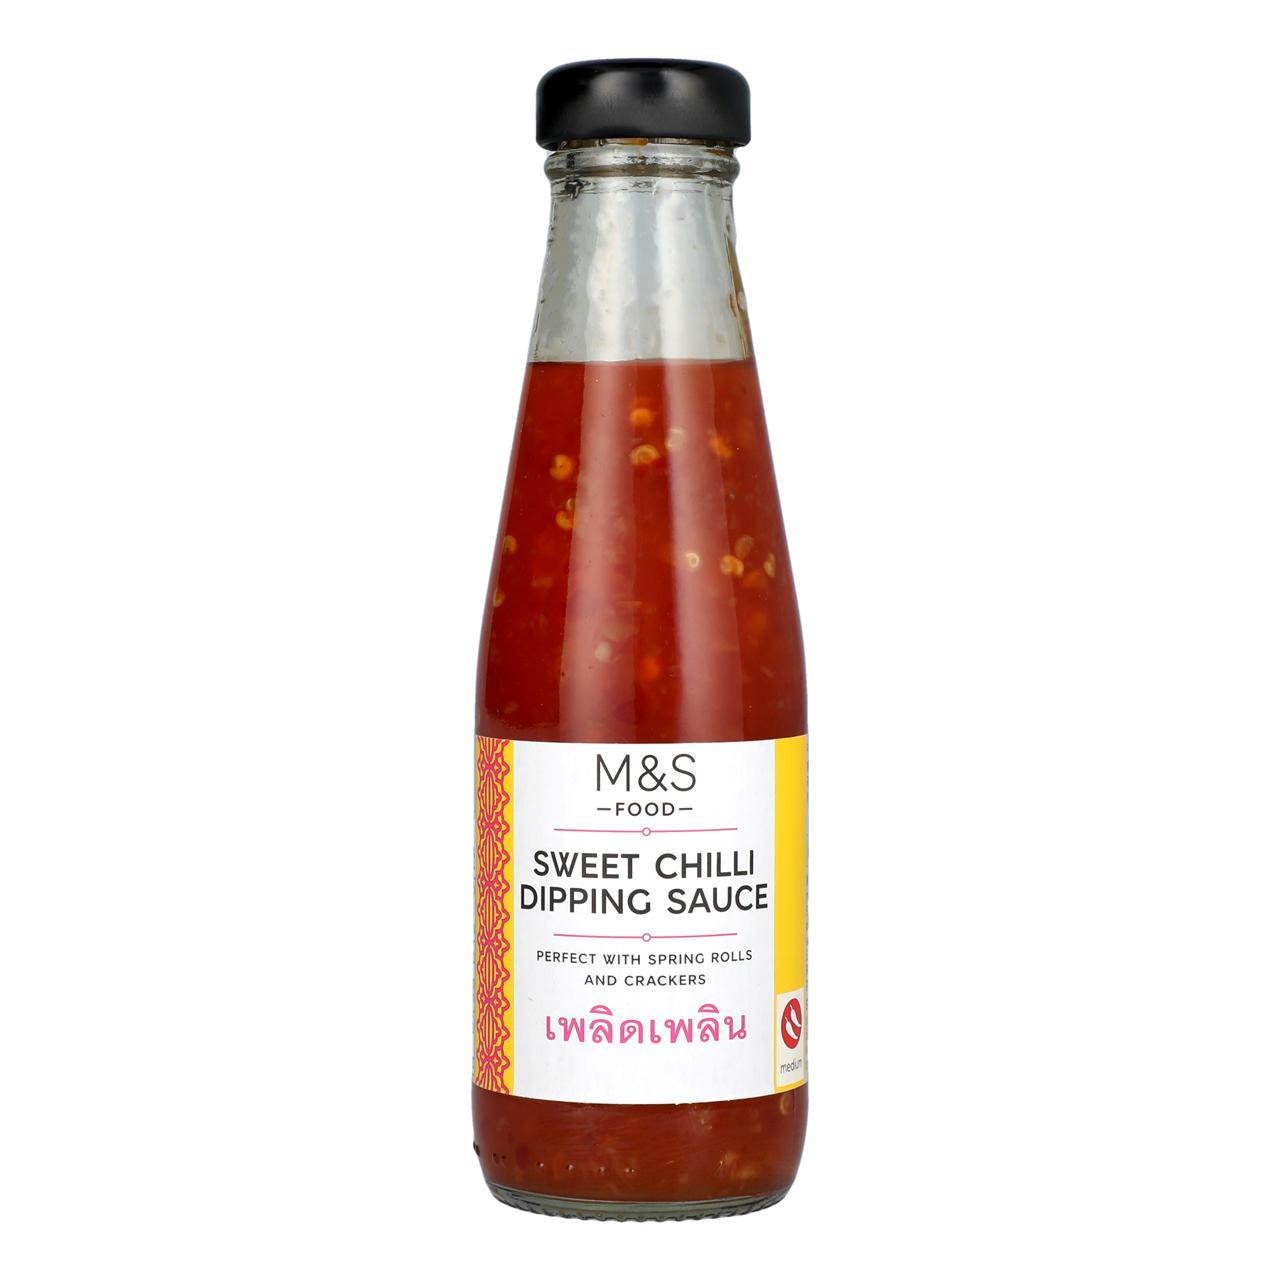 M&S Sweet Chilli Dipping Sauce